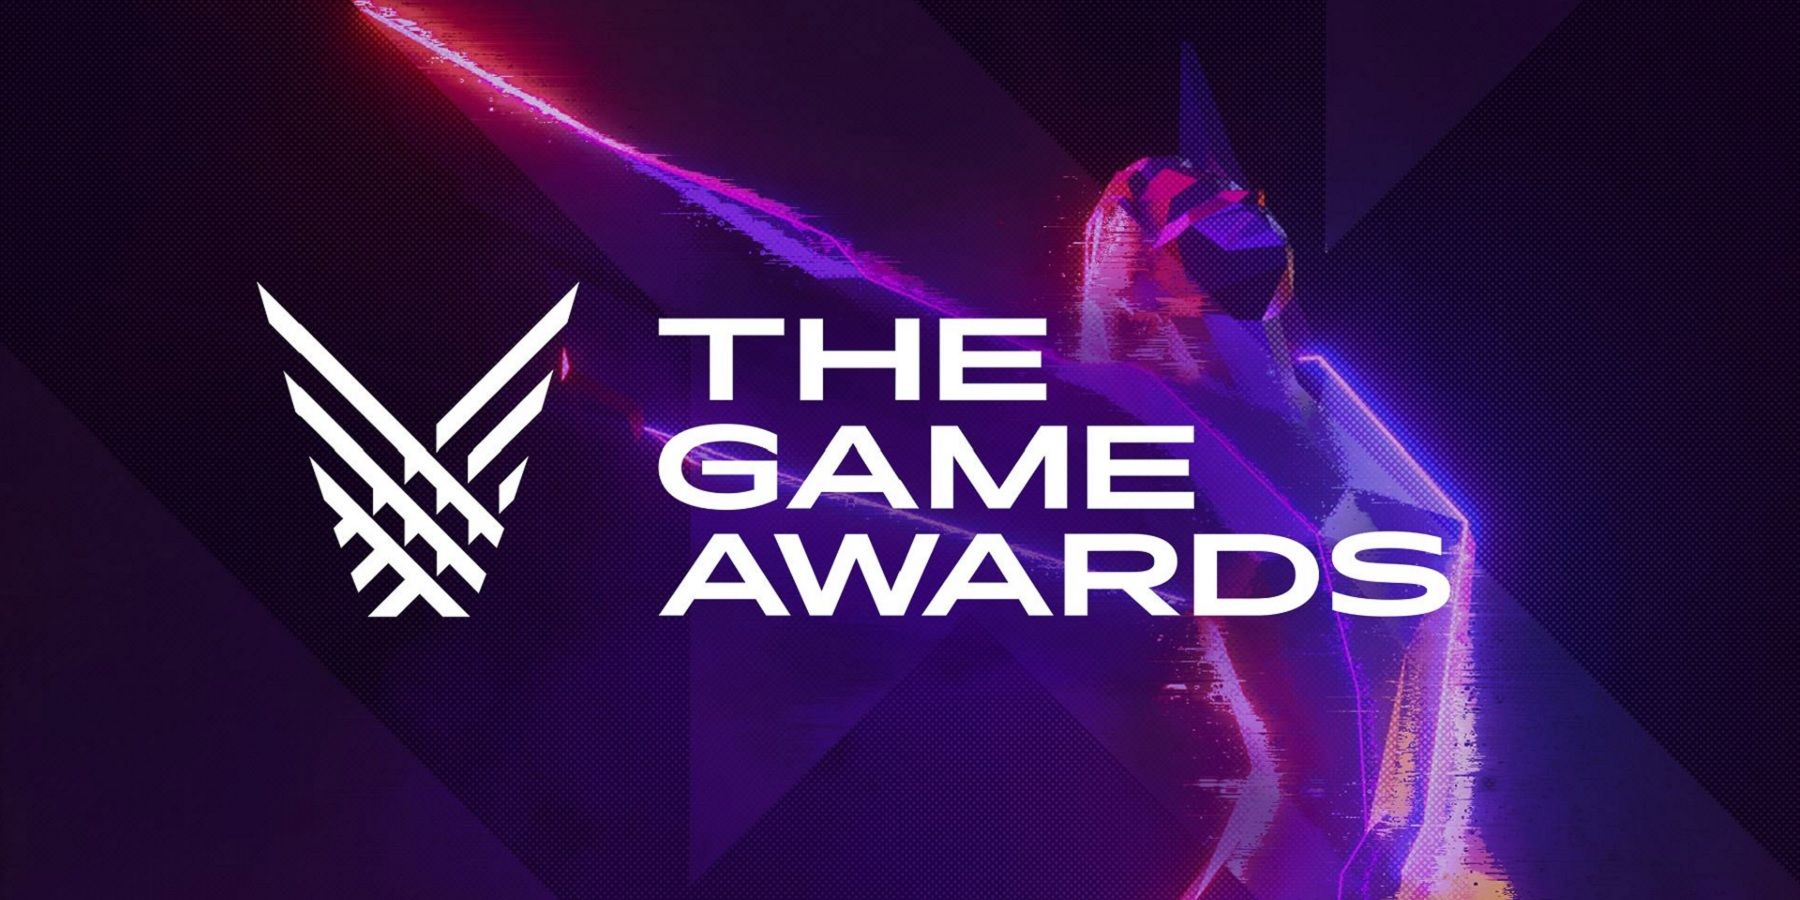 the game awards trophy and logo